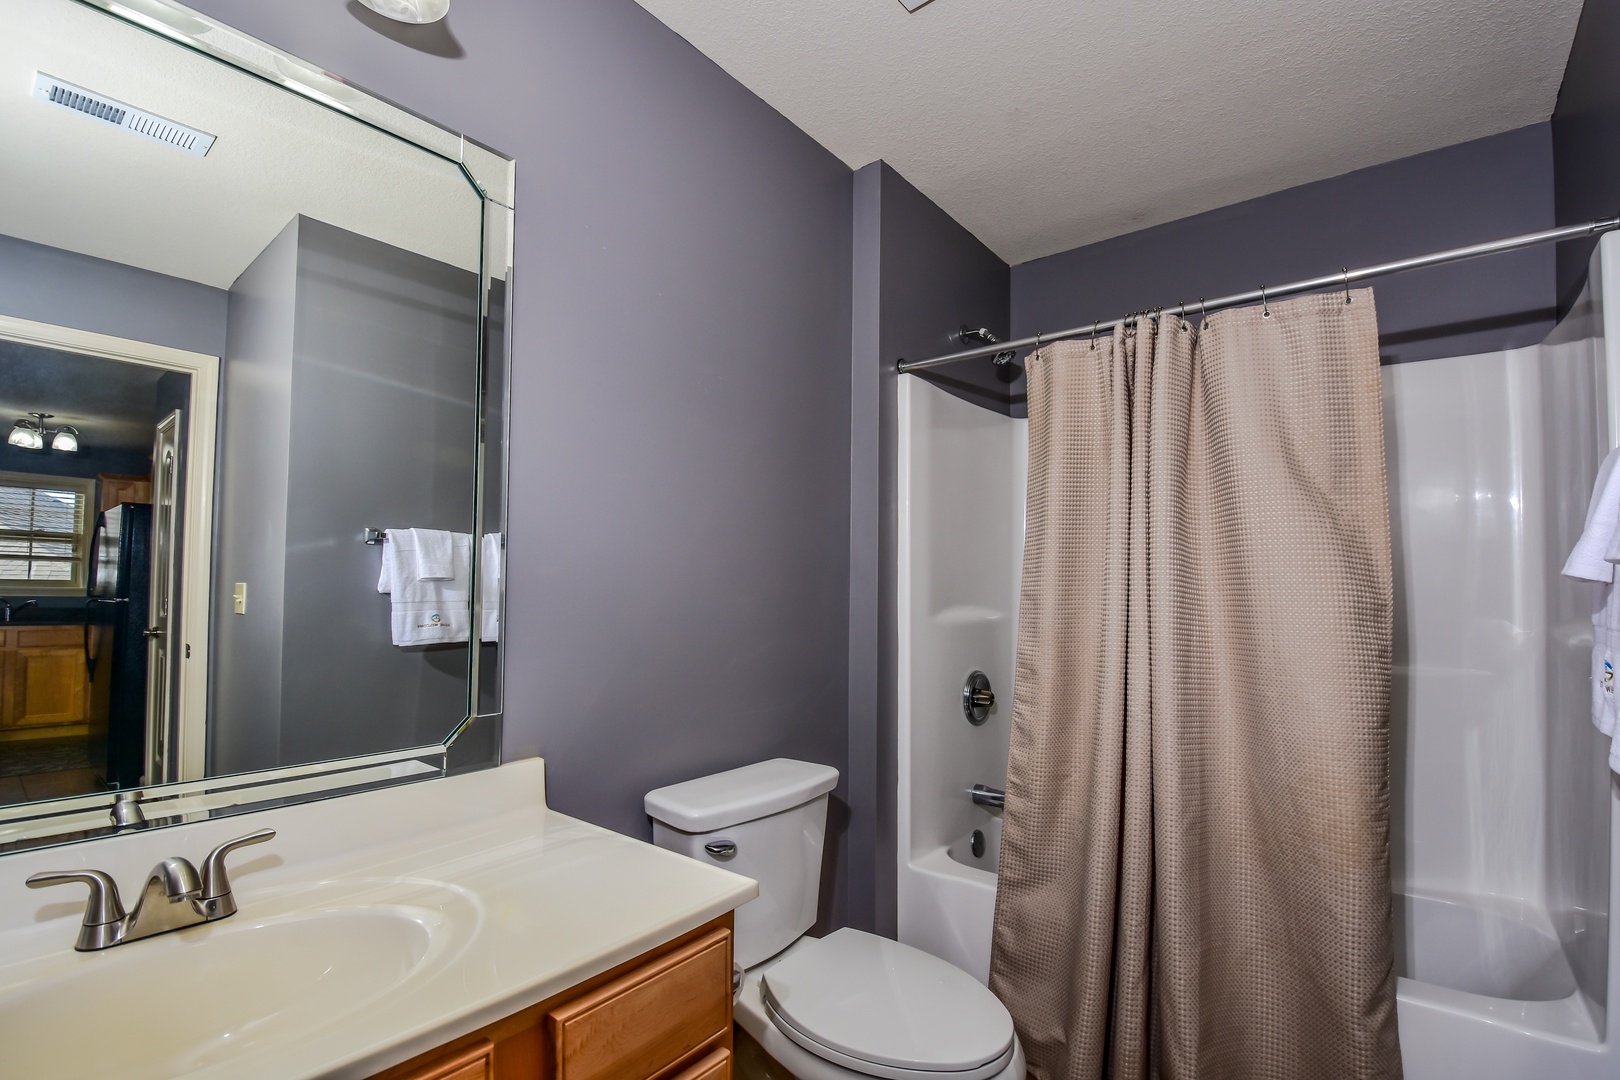 The shared full bath features a single vanity & shower/tub combo